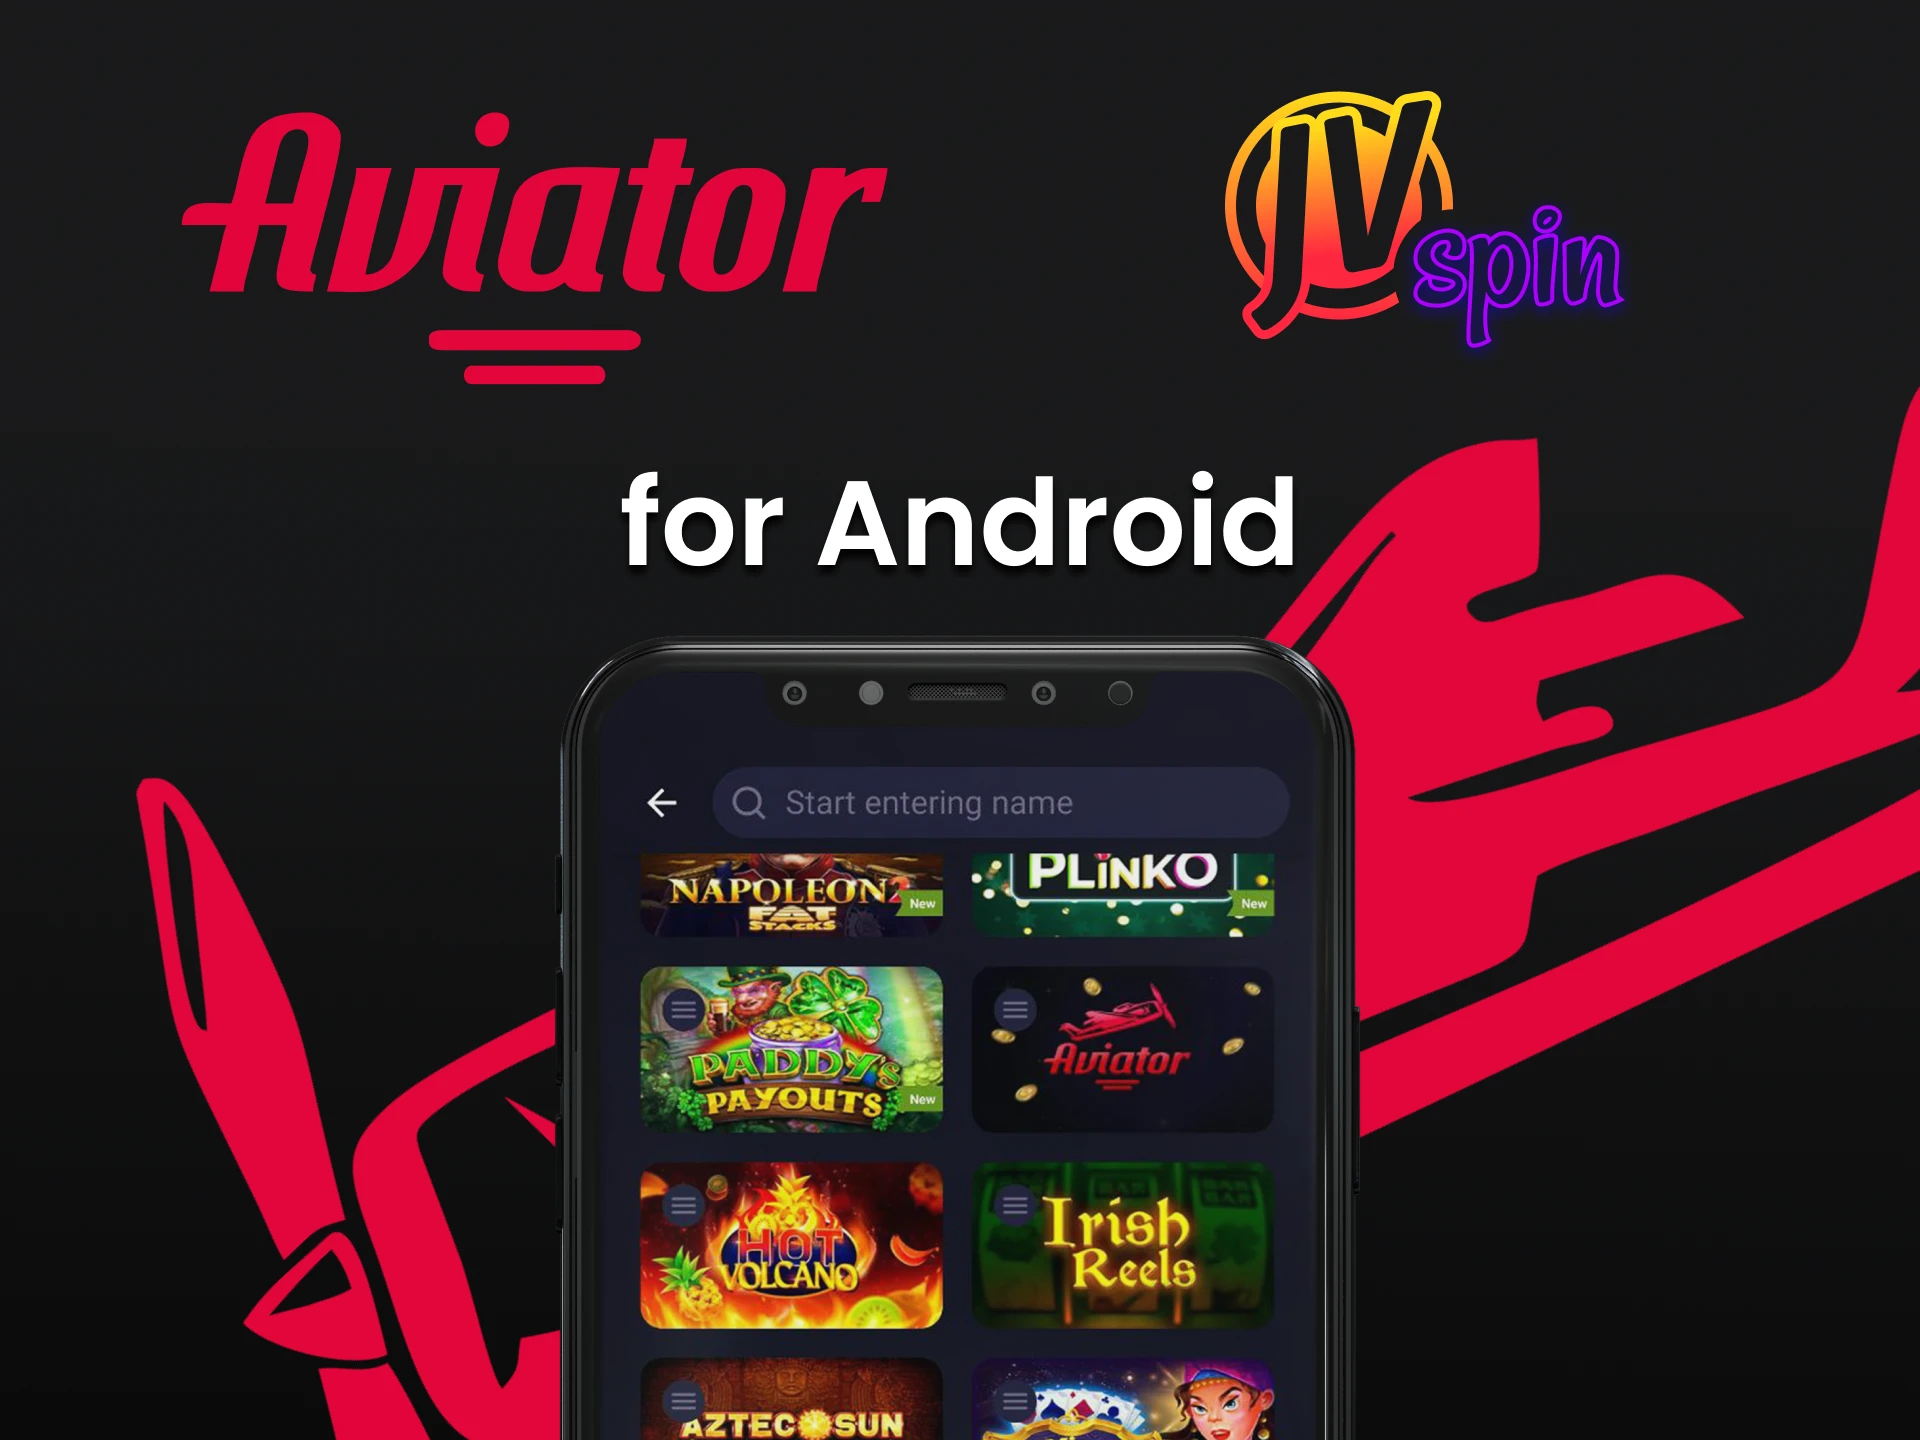 Play Aviator on the JV Slot Android app.